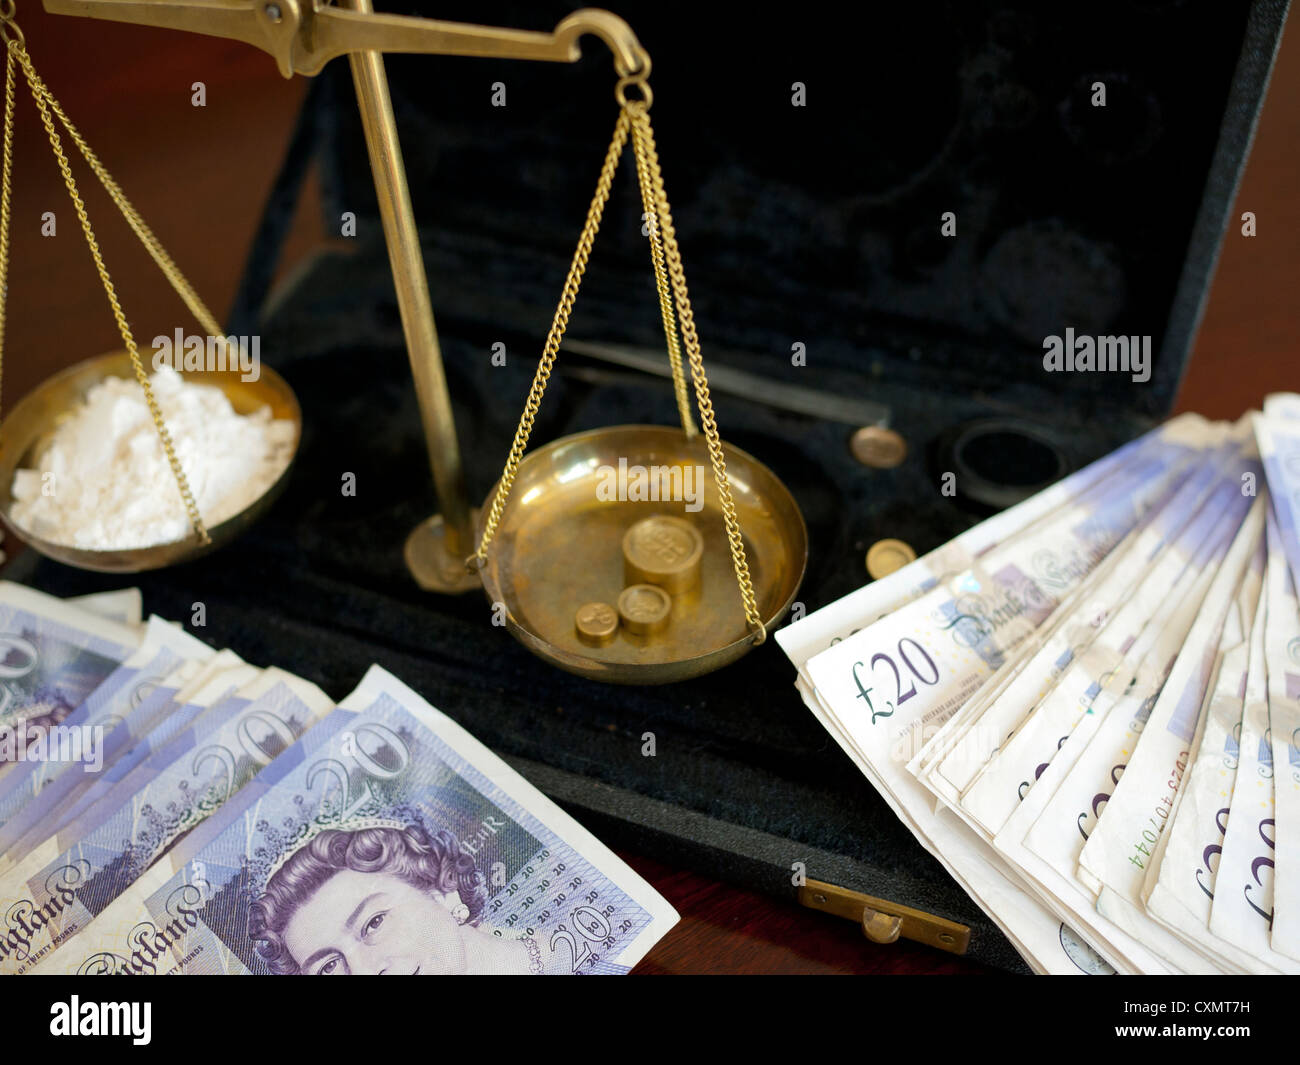 Old Brass Scales with drugs and money, England,UK. Stock Photo